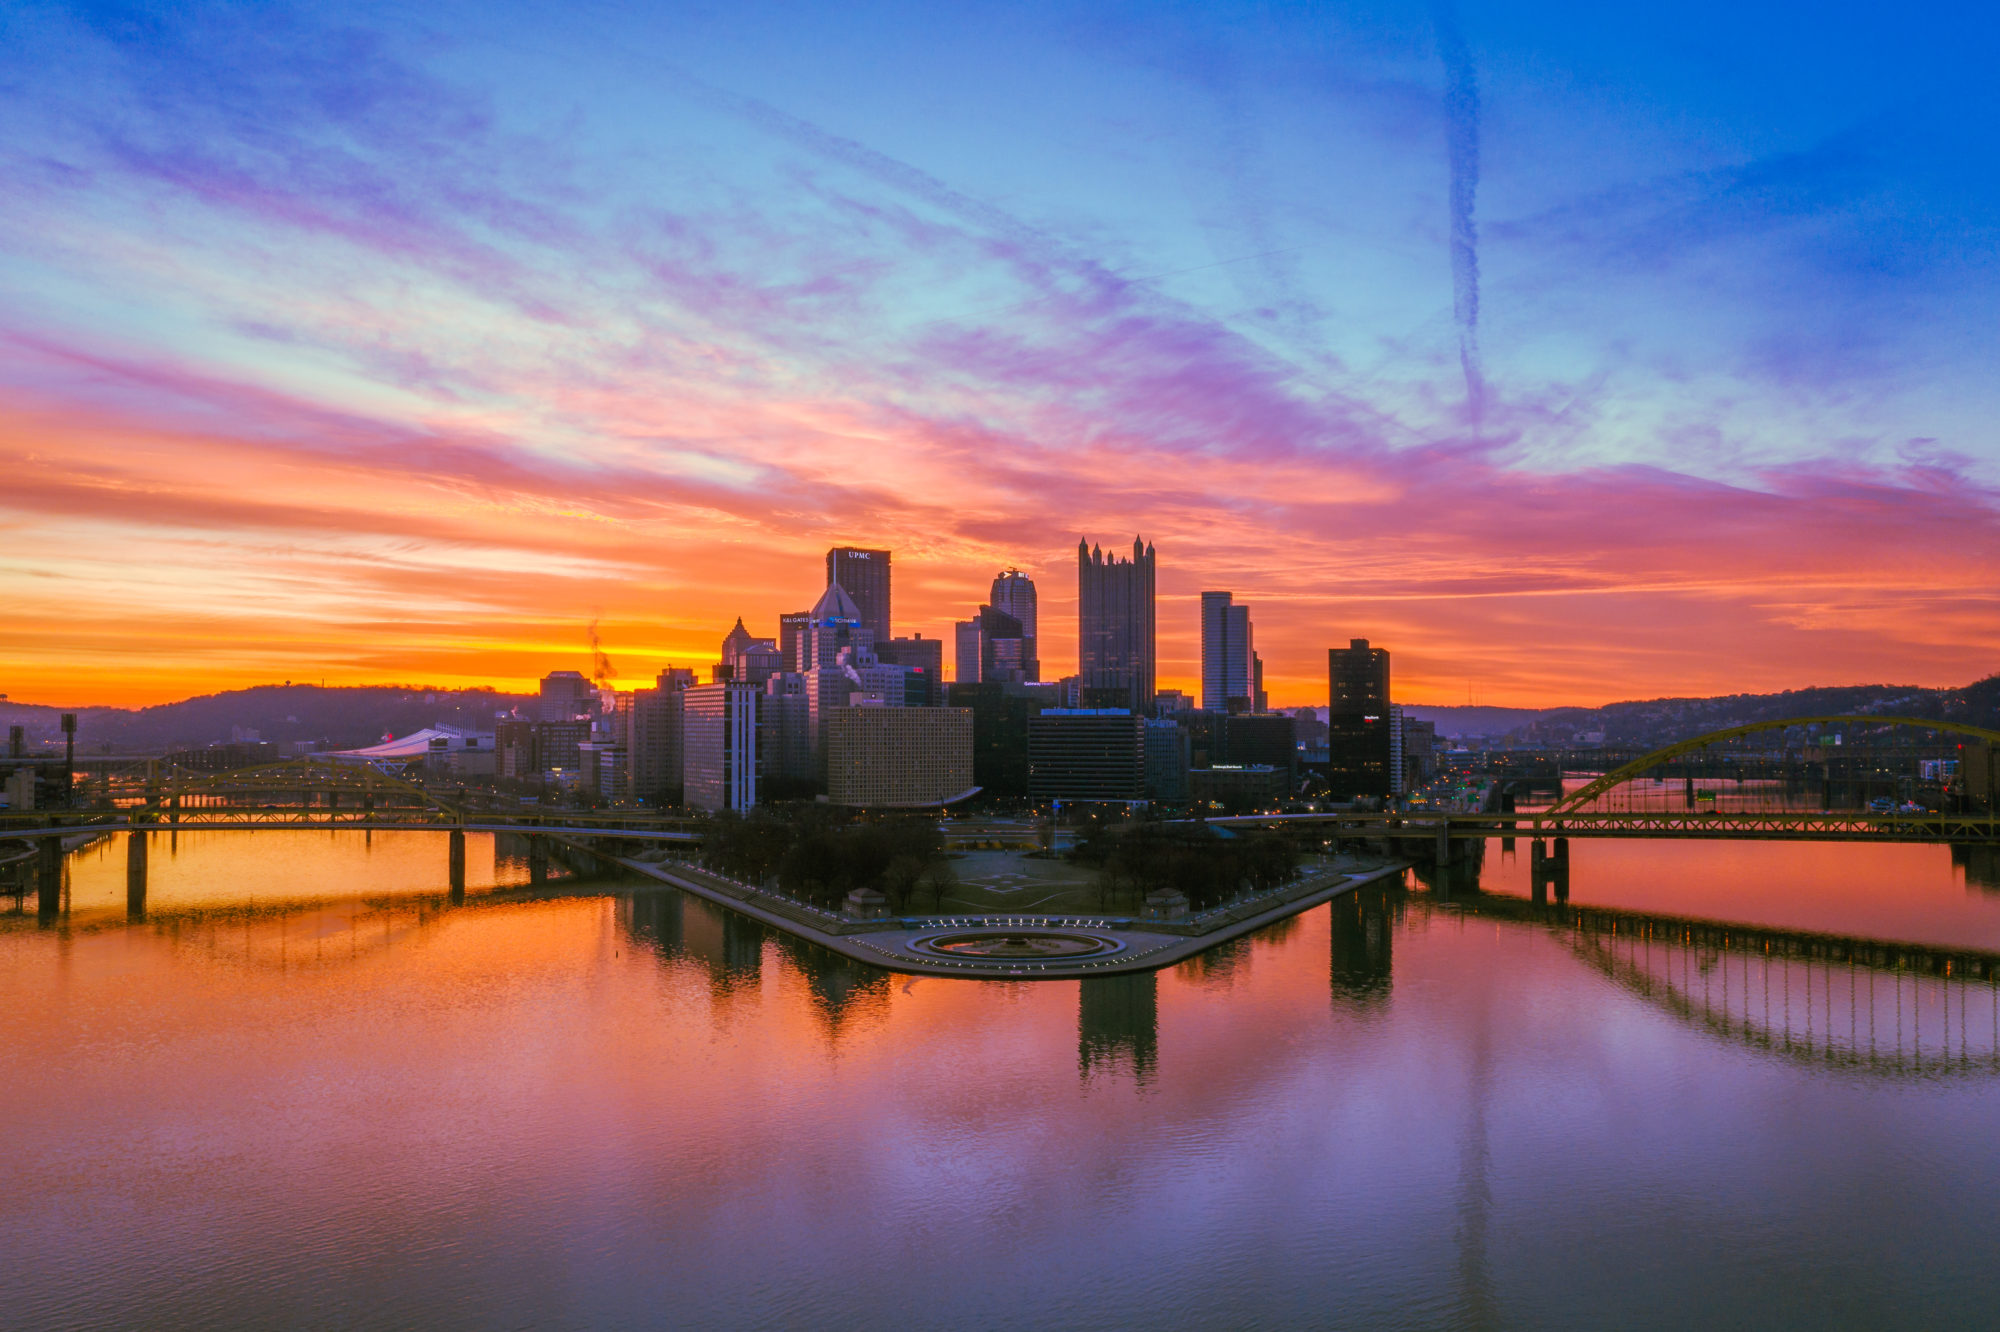 Scenic sunset shot of downtown Pittsburgh with The Point in the foreground